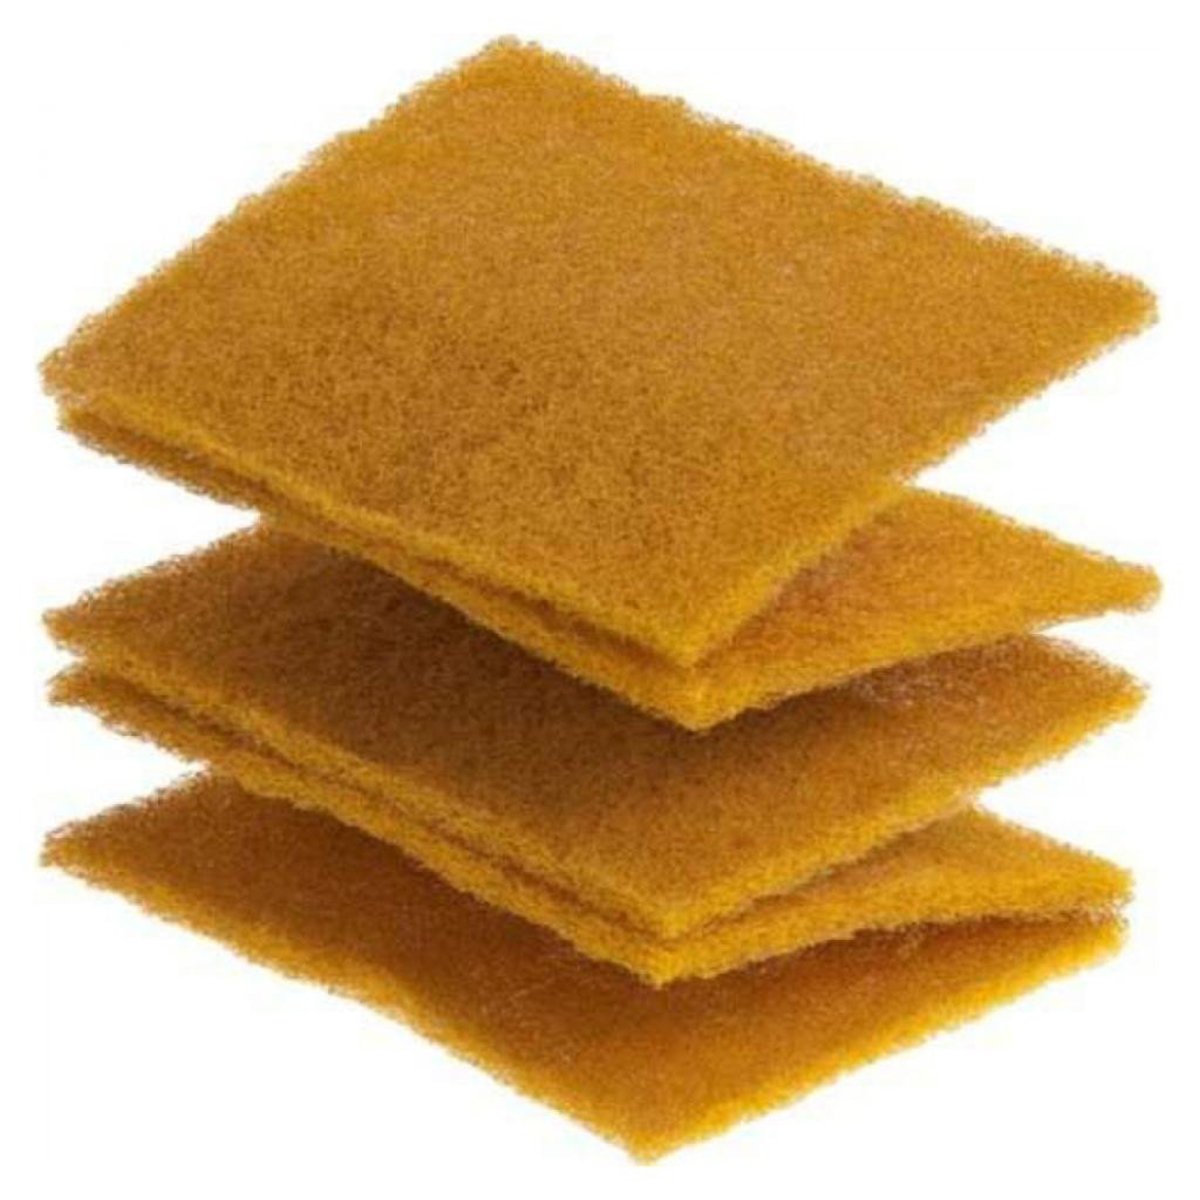 Gold-coloured Vlies is an extra-fine synthetic woven abrasive. It comes in 115x152mm pads that can be torn off.